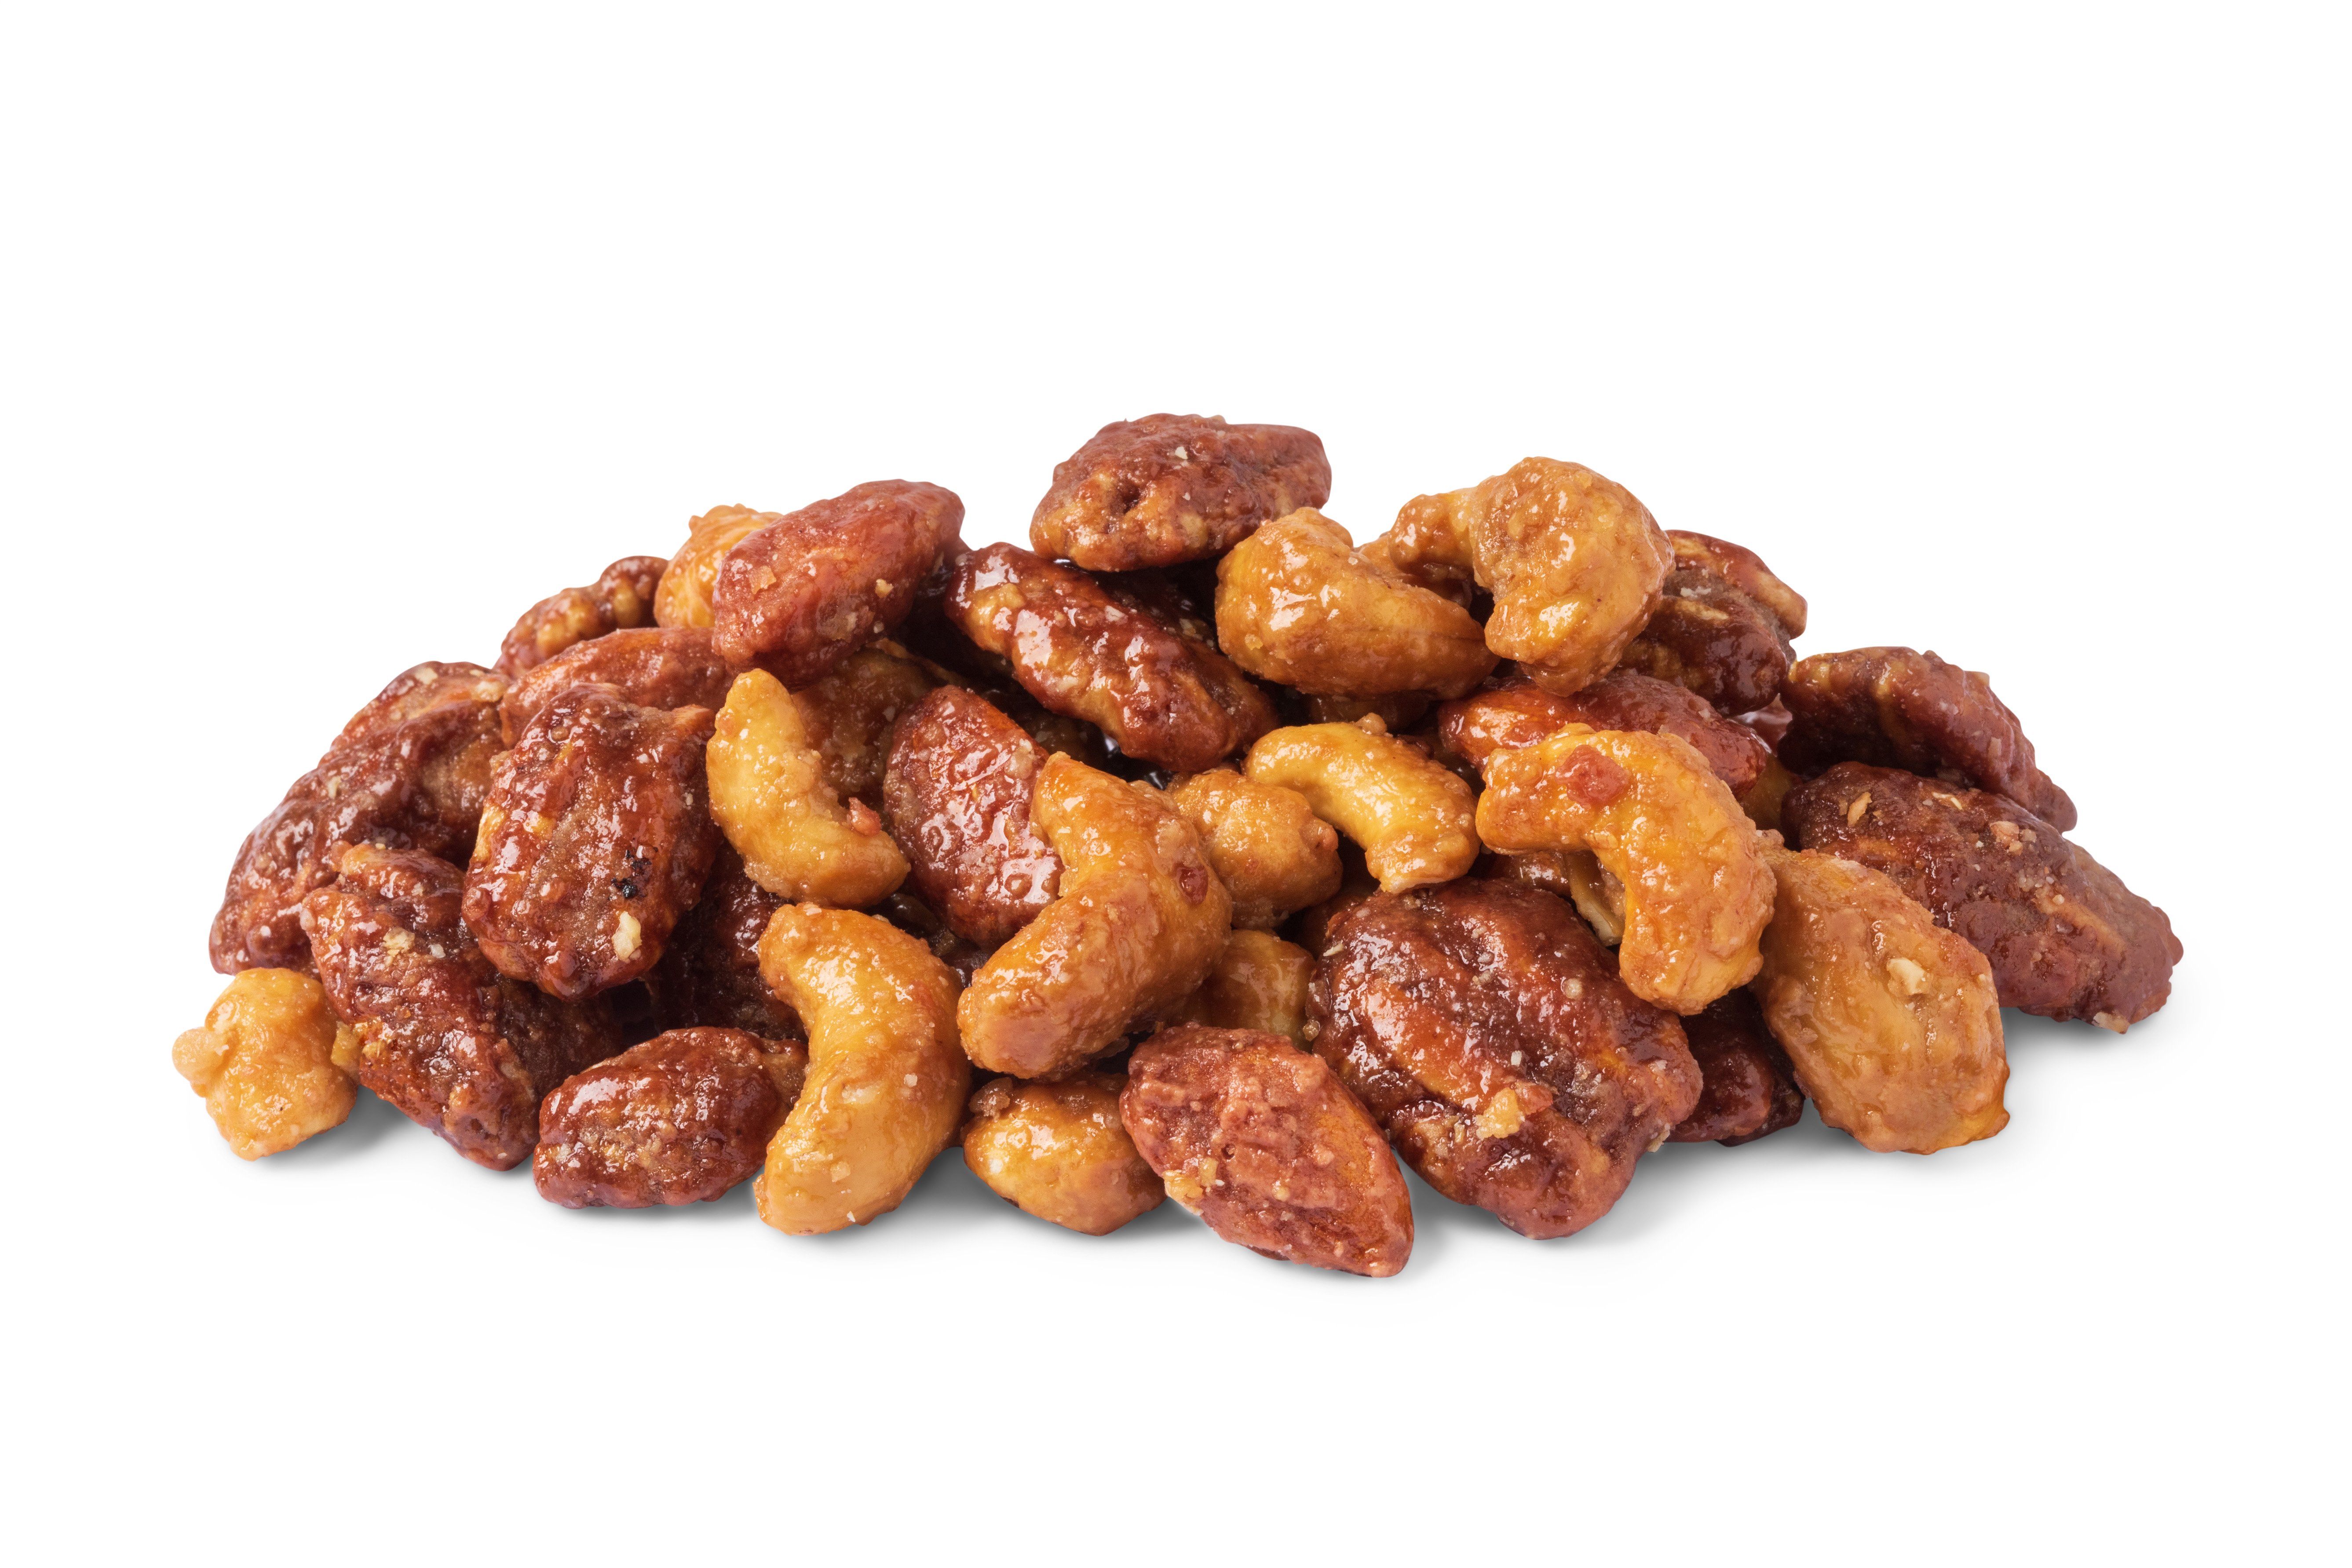 Supreme Roasted Mixed Nuts (Salted) 